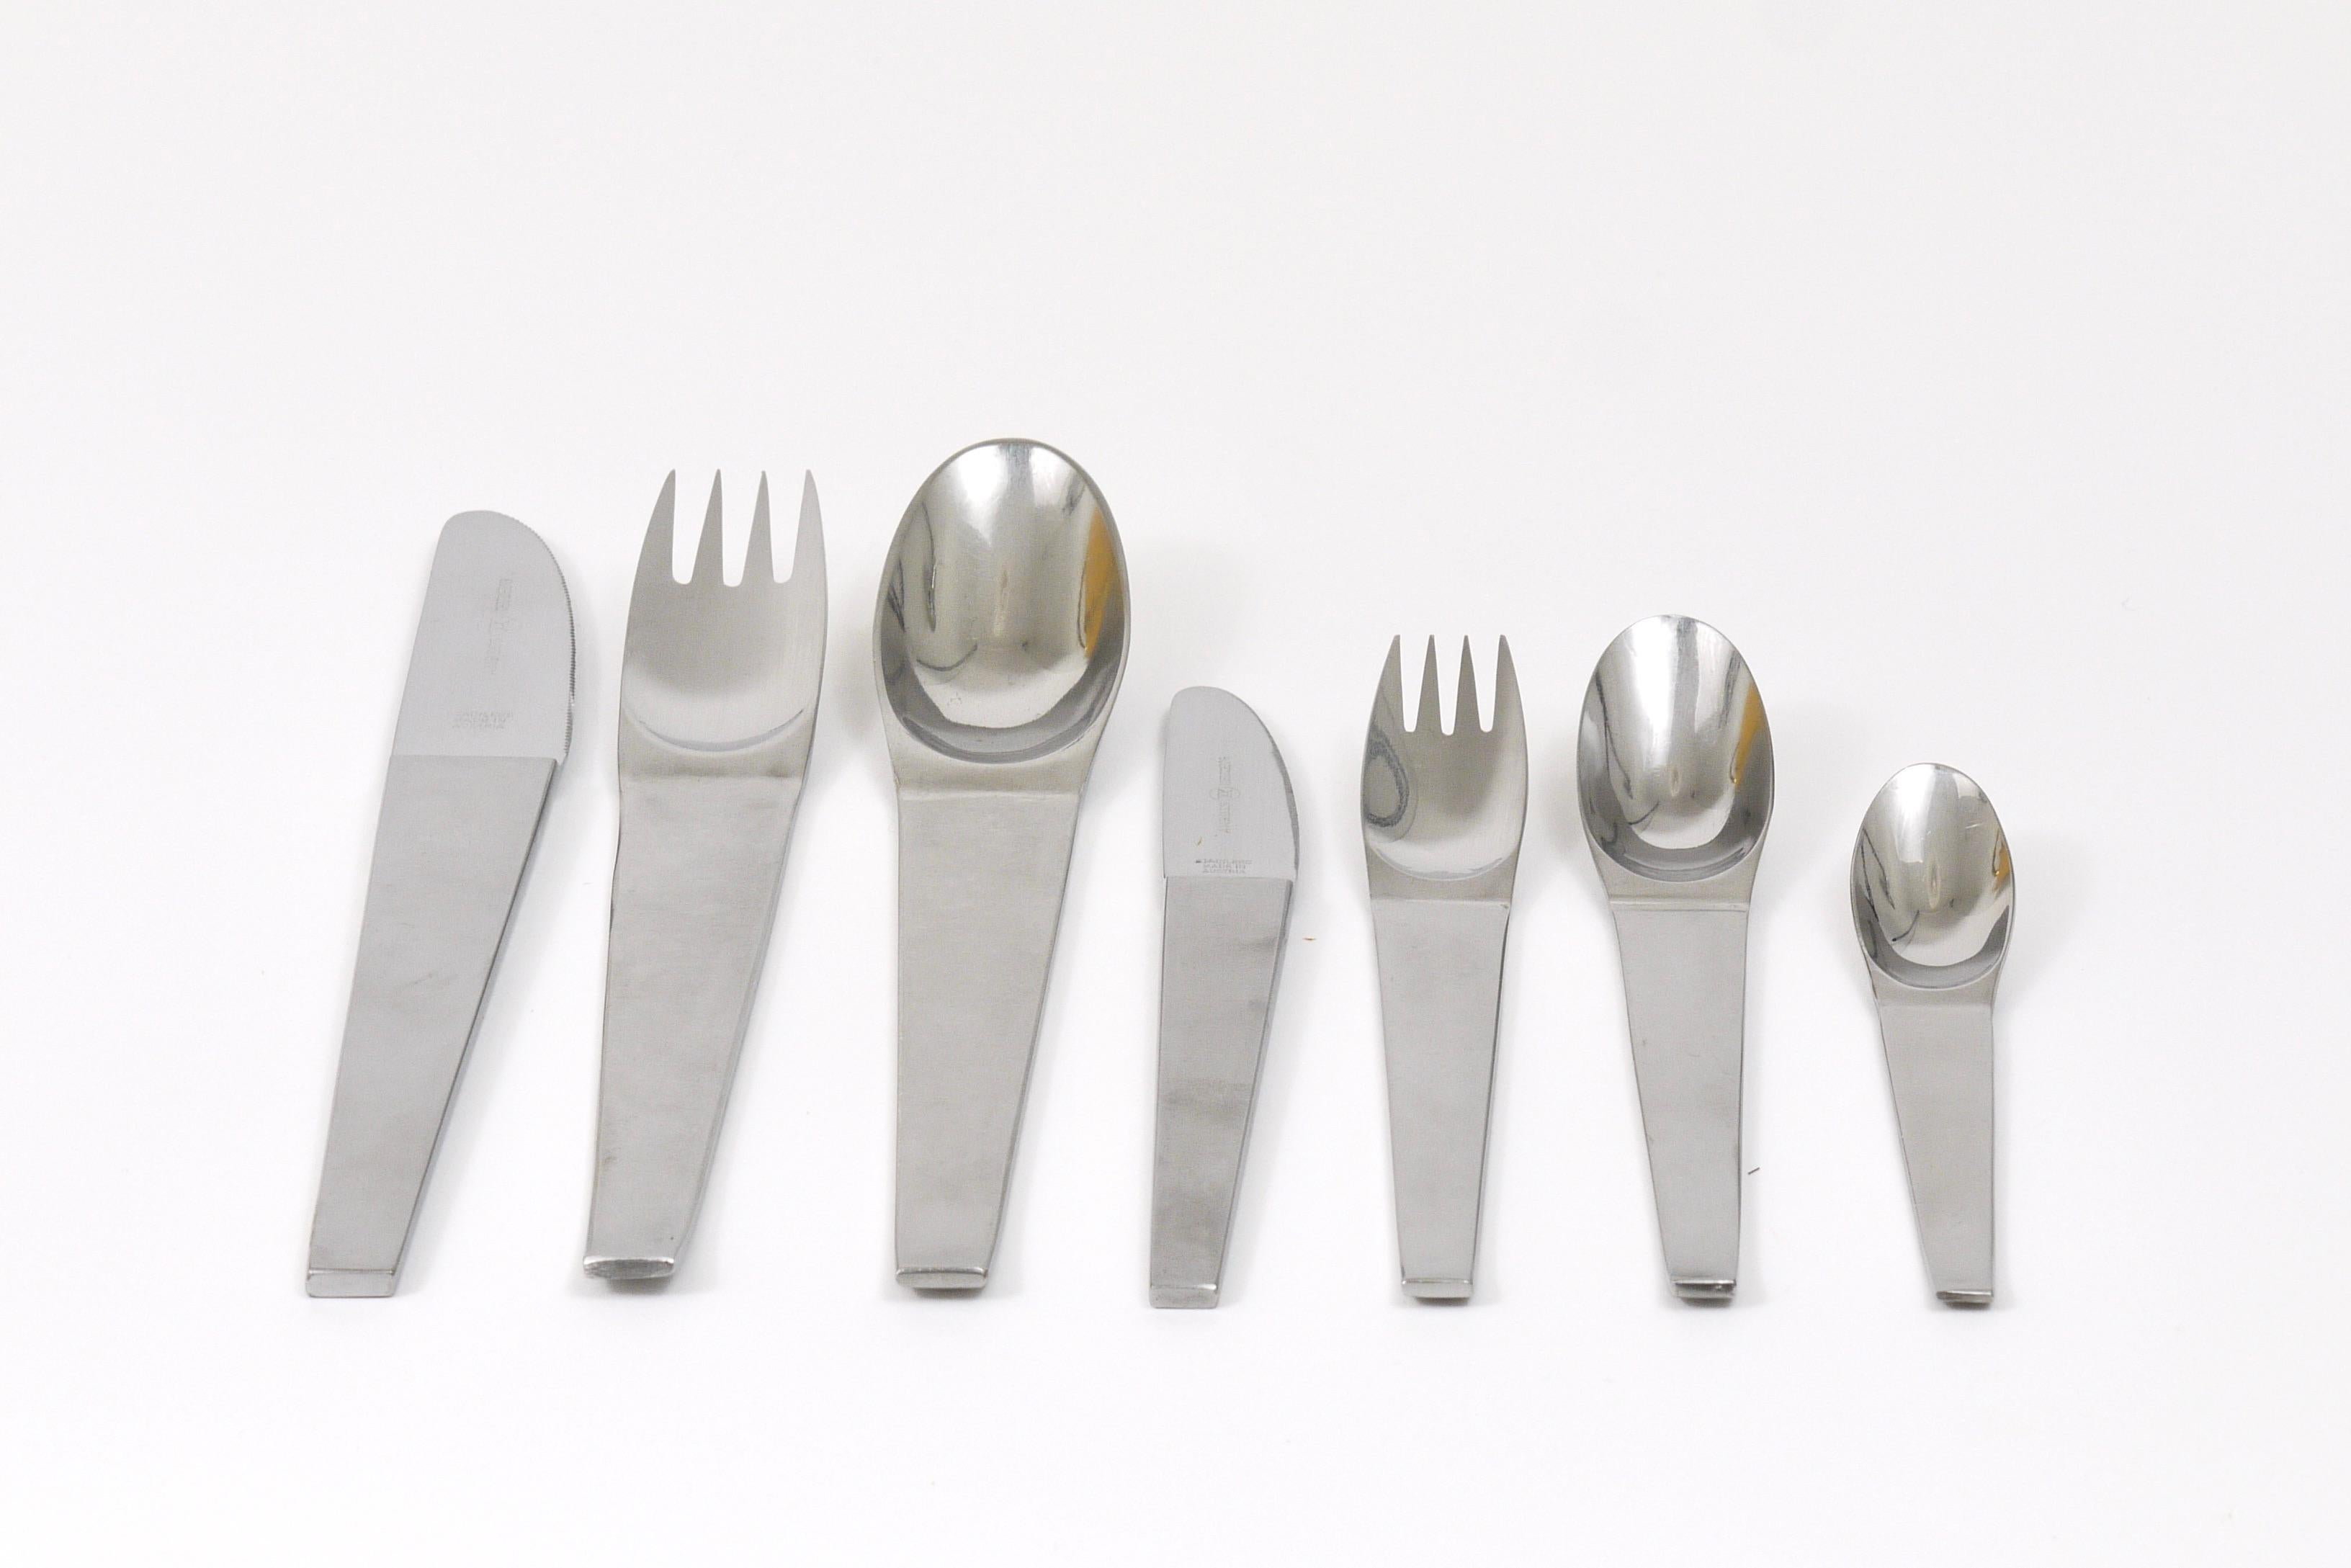 A comprehensive set of midcentury flatware from the 1950s, the award-winning model 2060, designed by Carl Aubock and executed by Amboss Neuzeug Austria. High-quality cutlery, made of brushed and partly polished 18/8 stainless steel. 42 pieces for